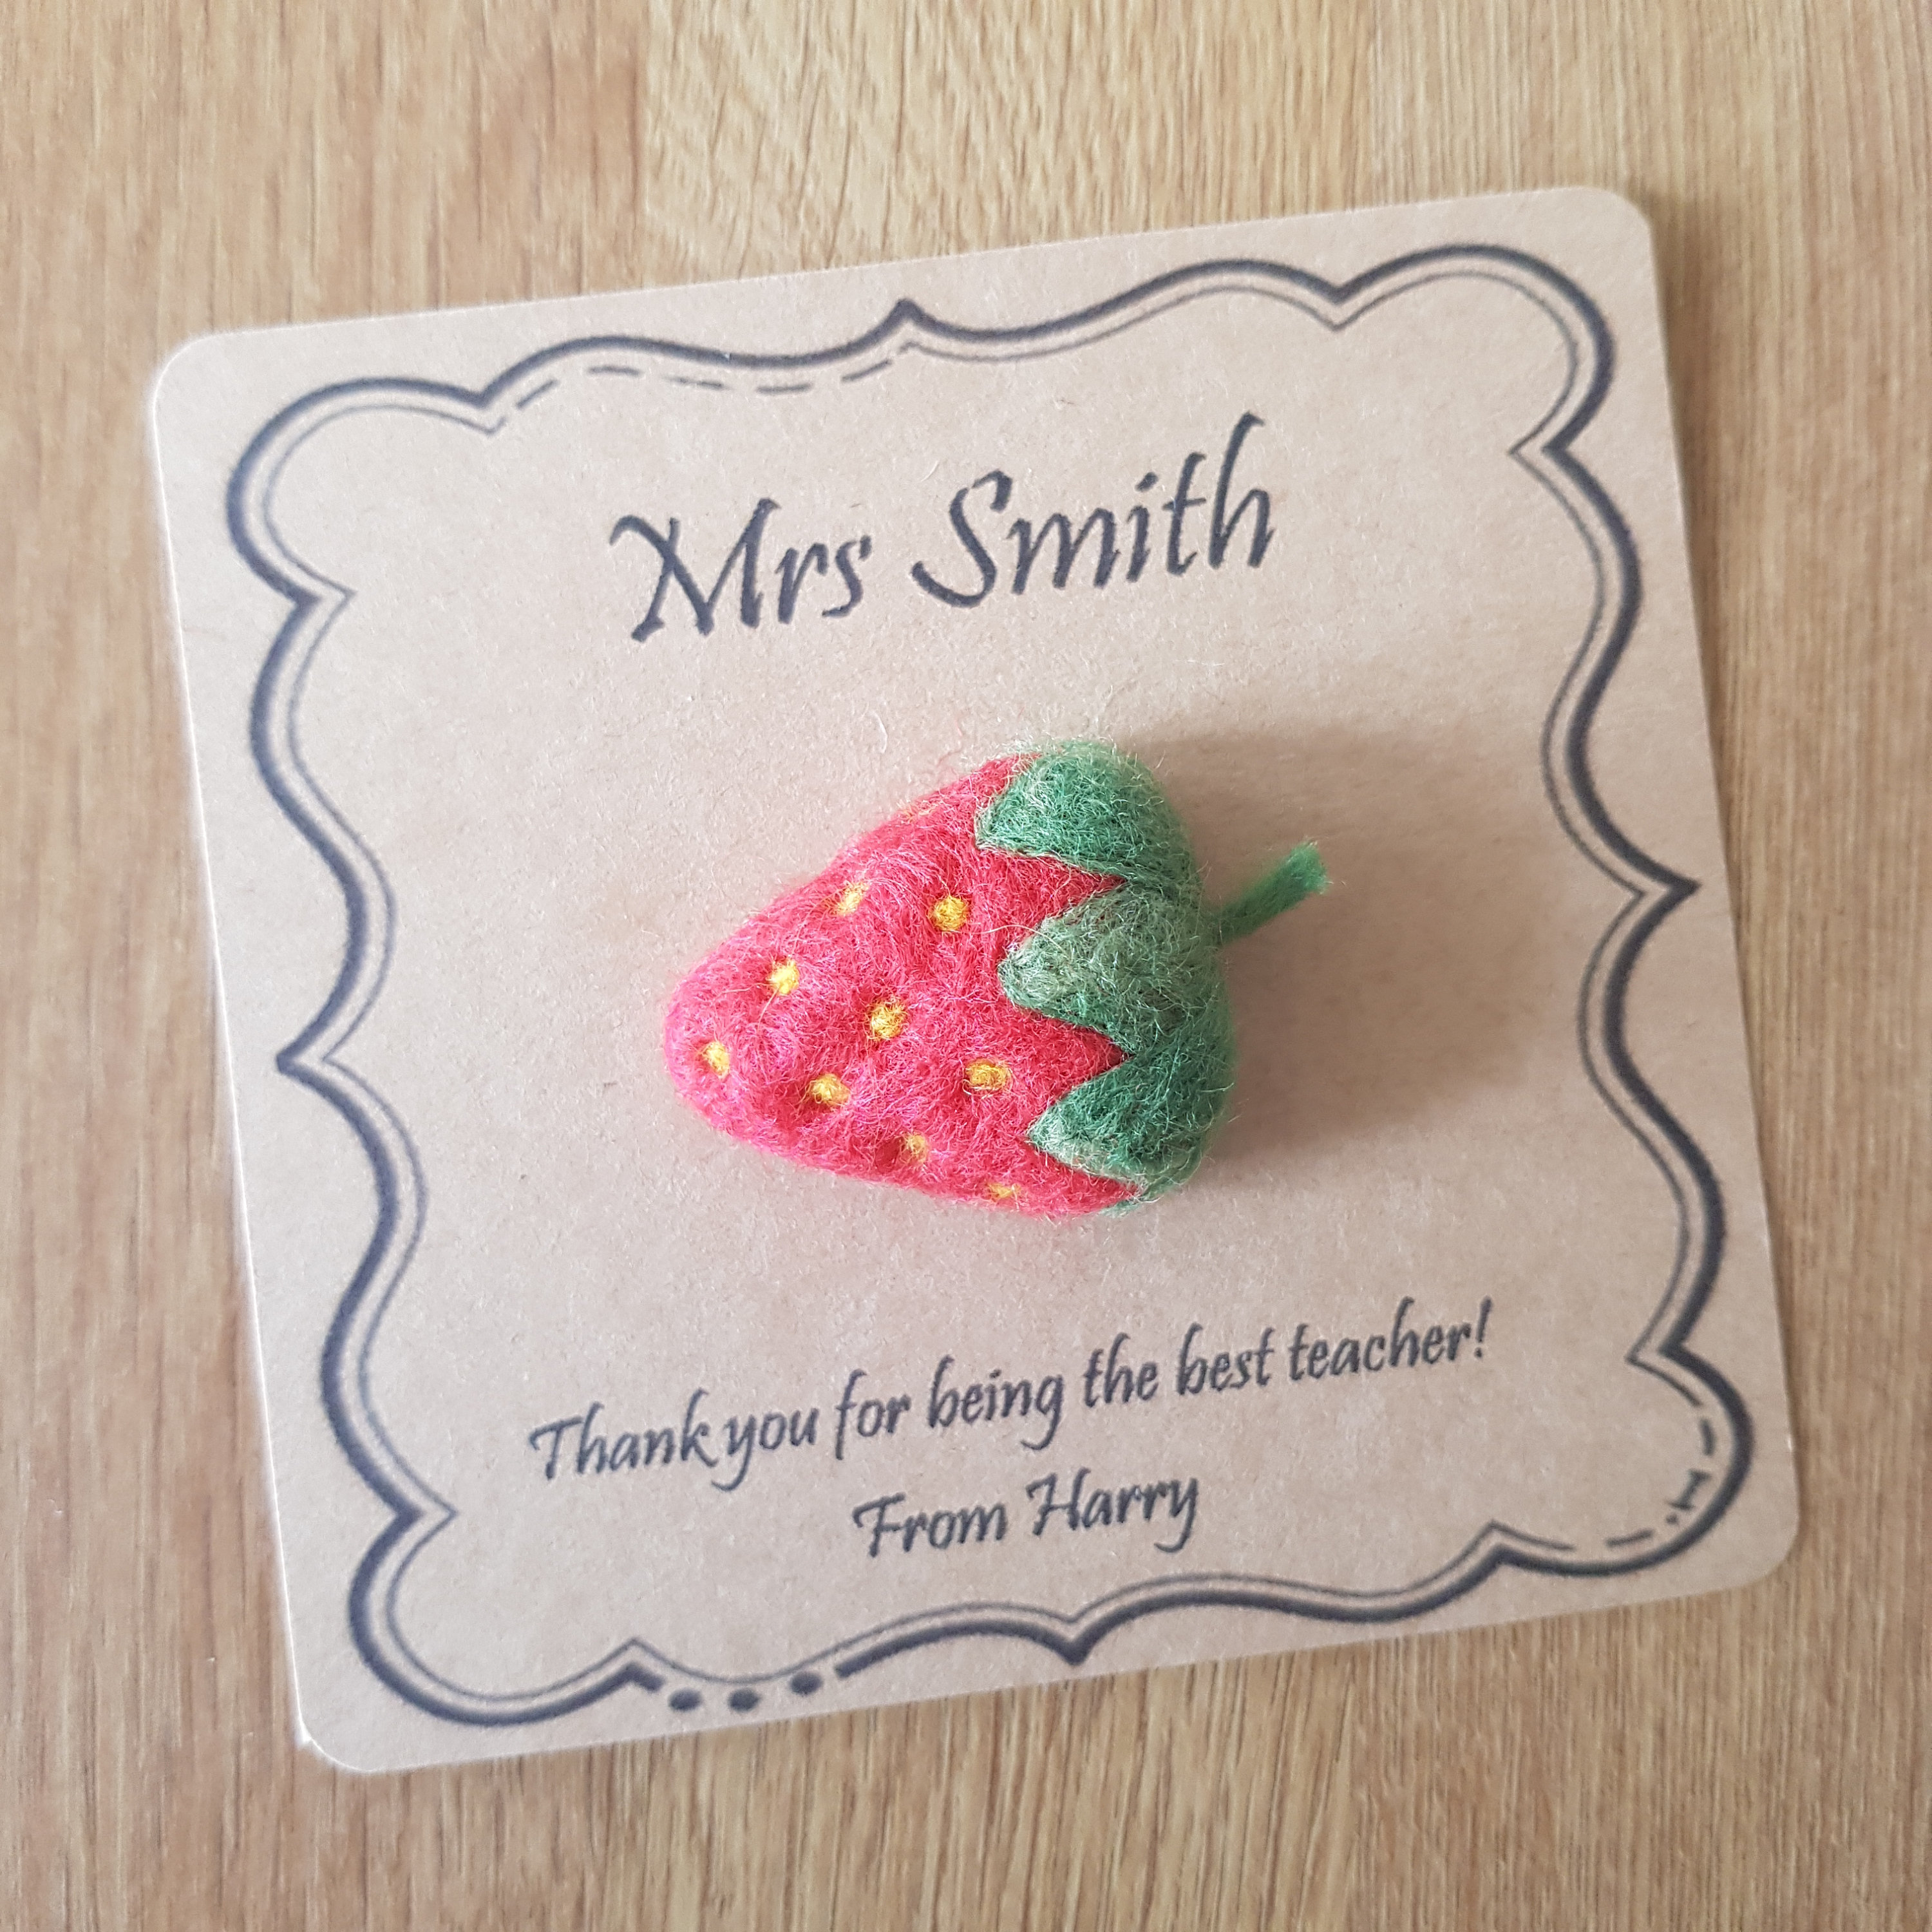 Personalised Gift Needle Felted Strawberry Brooch Handmade in Red & Green